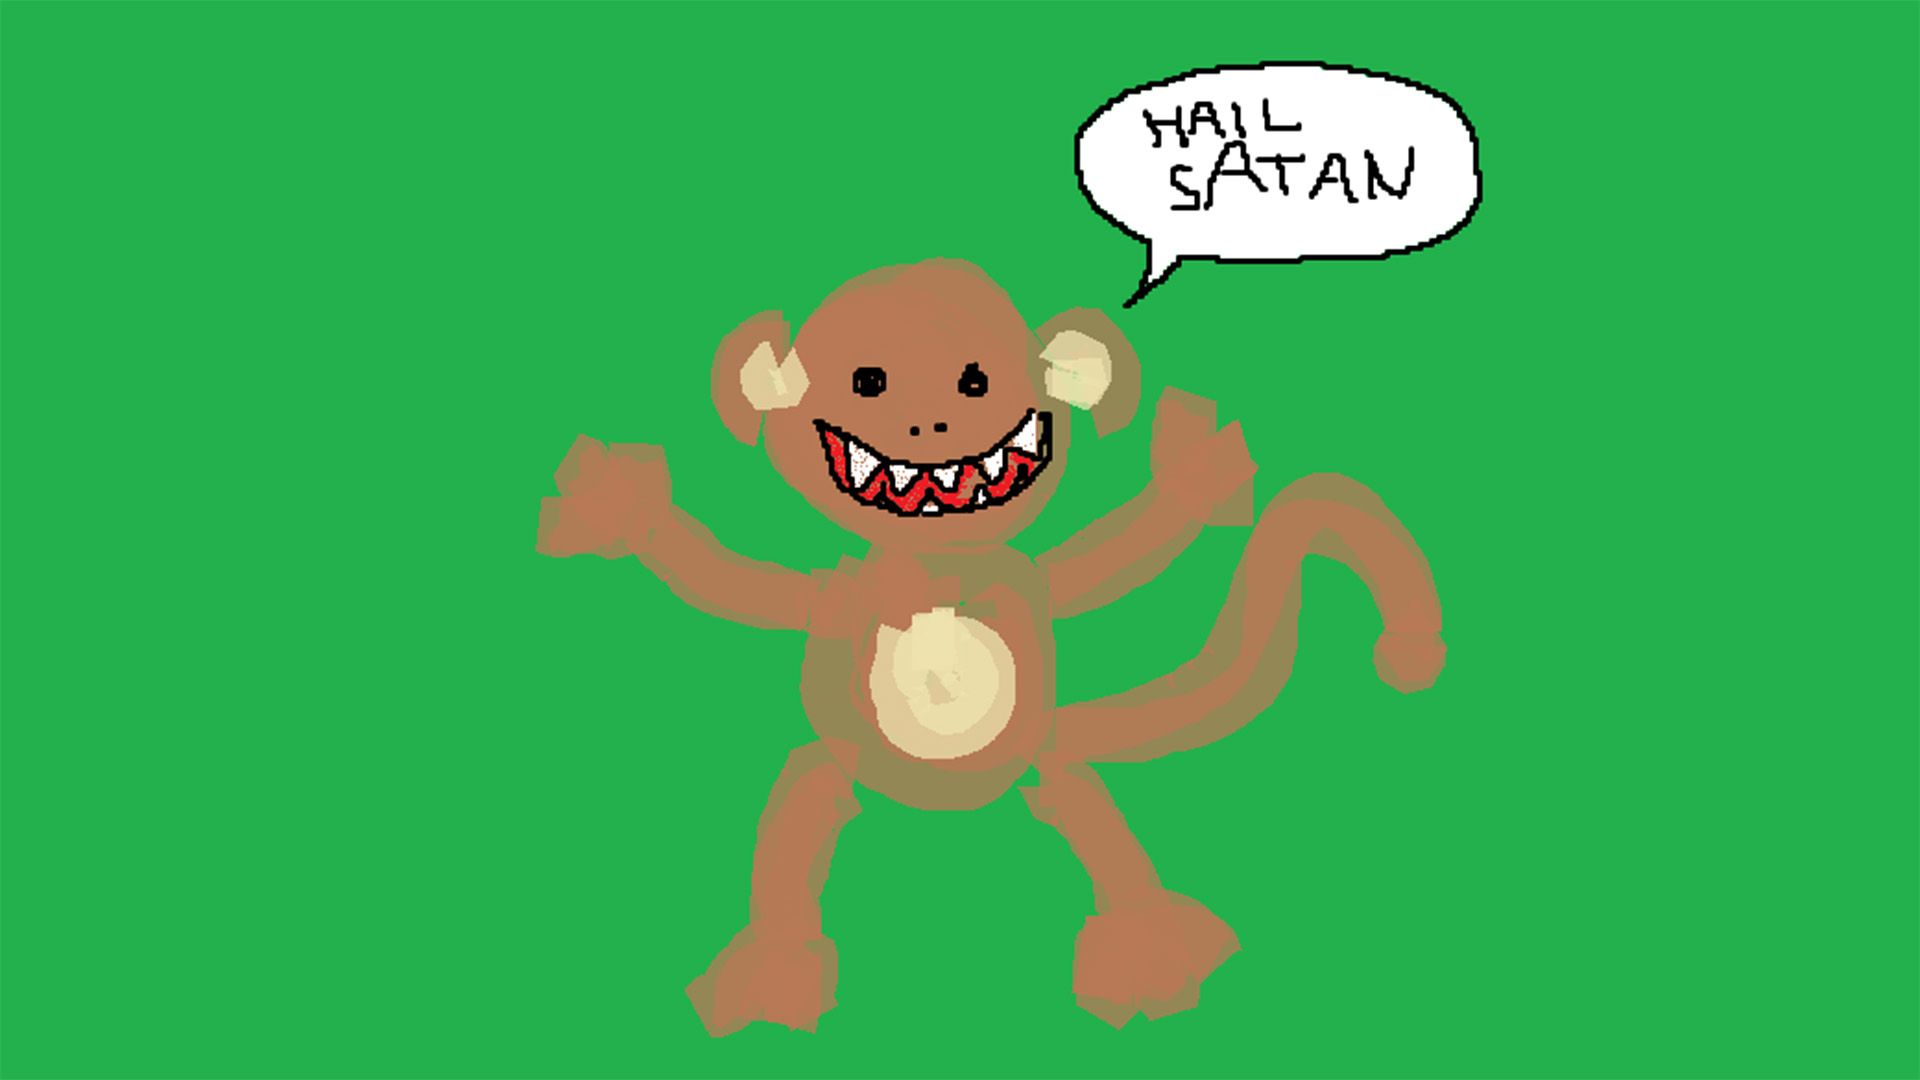 A crudely draw monkey on a green background with the words 'Hail Satan' in the upper corner.